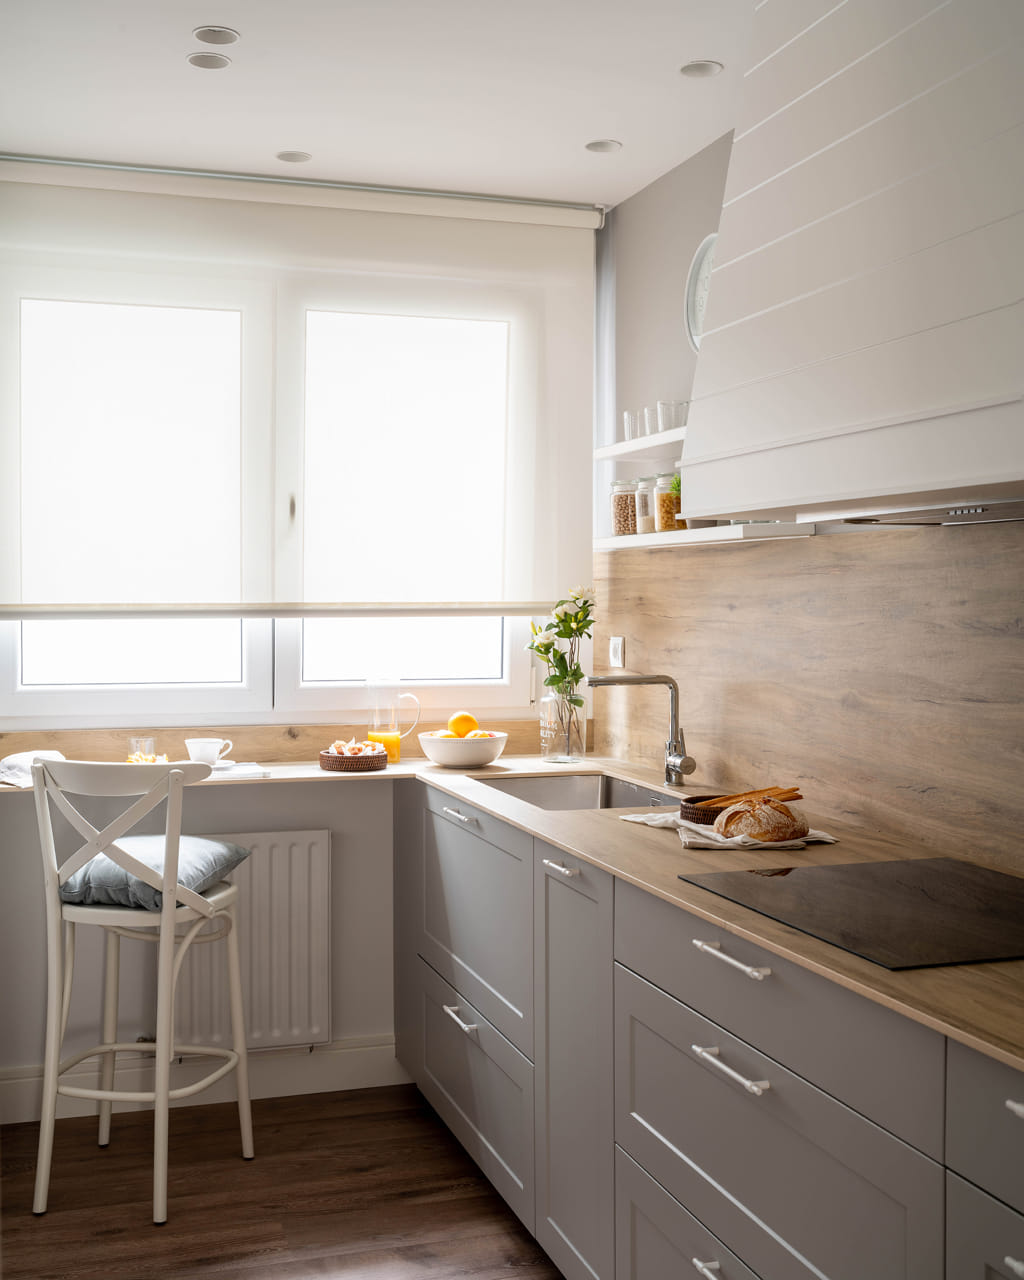 White and grey kitchen designed by Begoña Susaeta